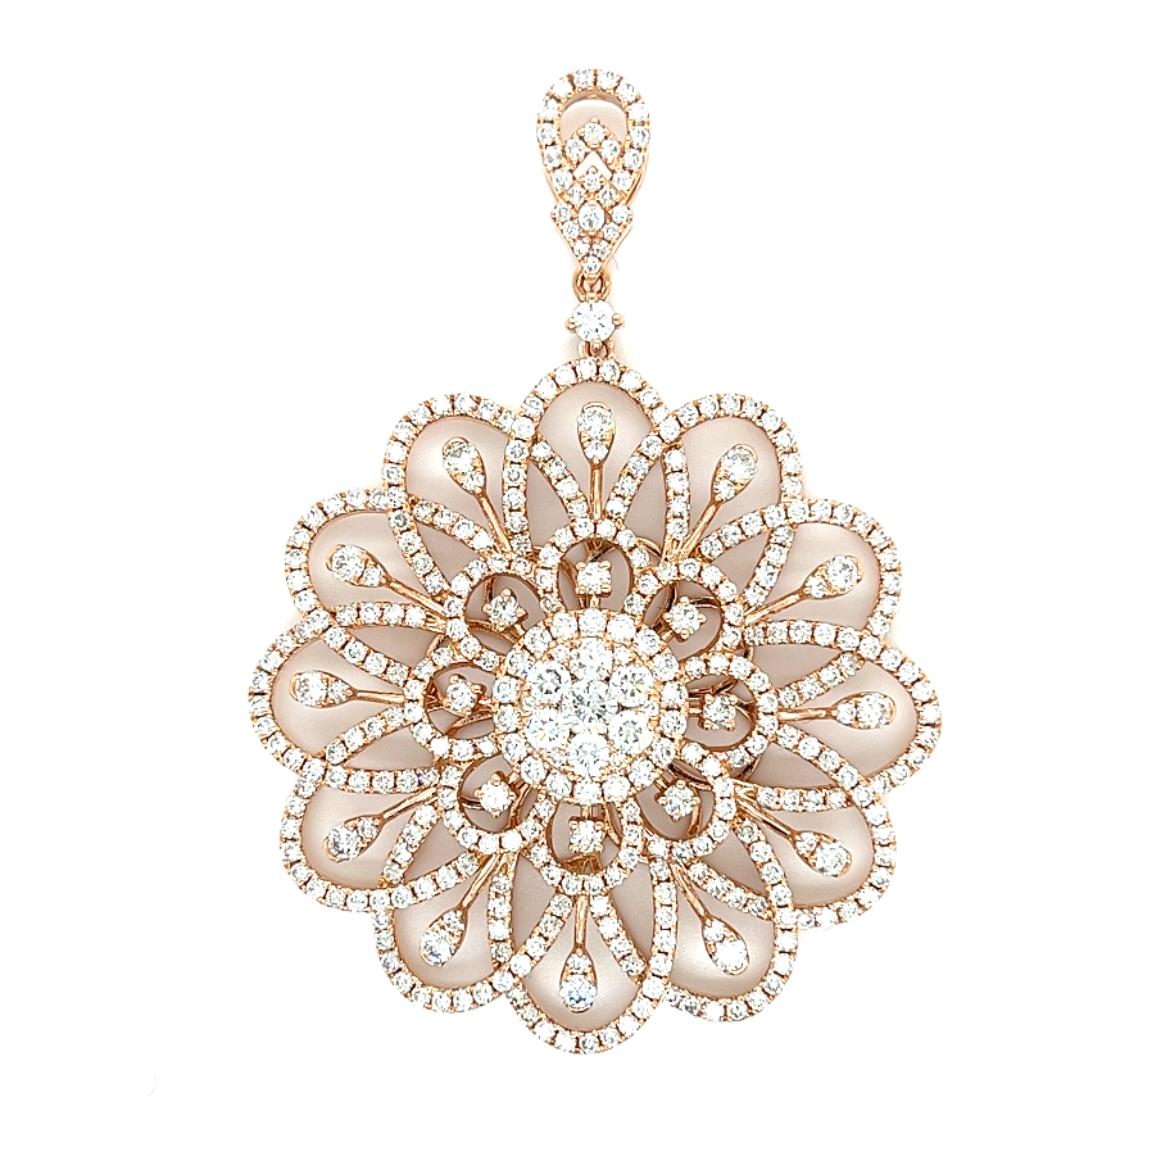 18K Rose Gold Brilliant Natural Diamond Pendant

18K Rose Gold - 15.950 GM
365 Diamonds - 5.252 CT

Captivating and classically elegant, this exquisite 18K rose gold pendant commands attention with its exceptional craftsmanship and dazzling diamond